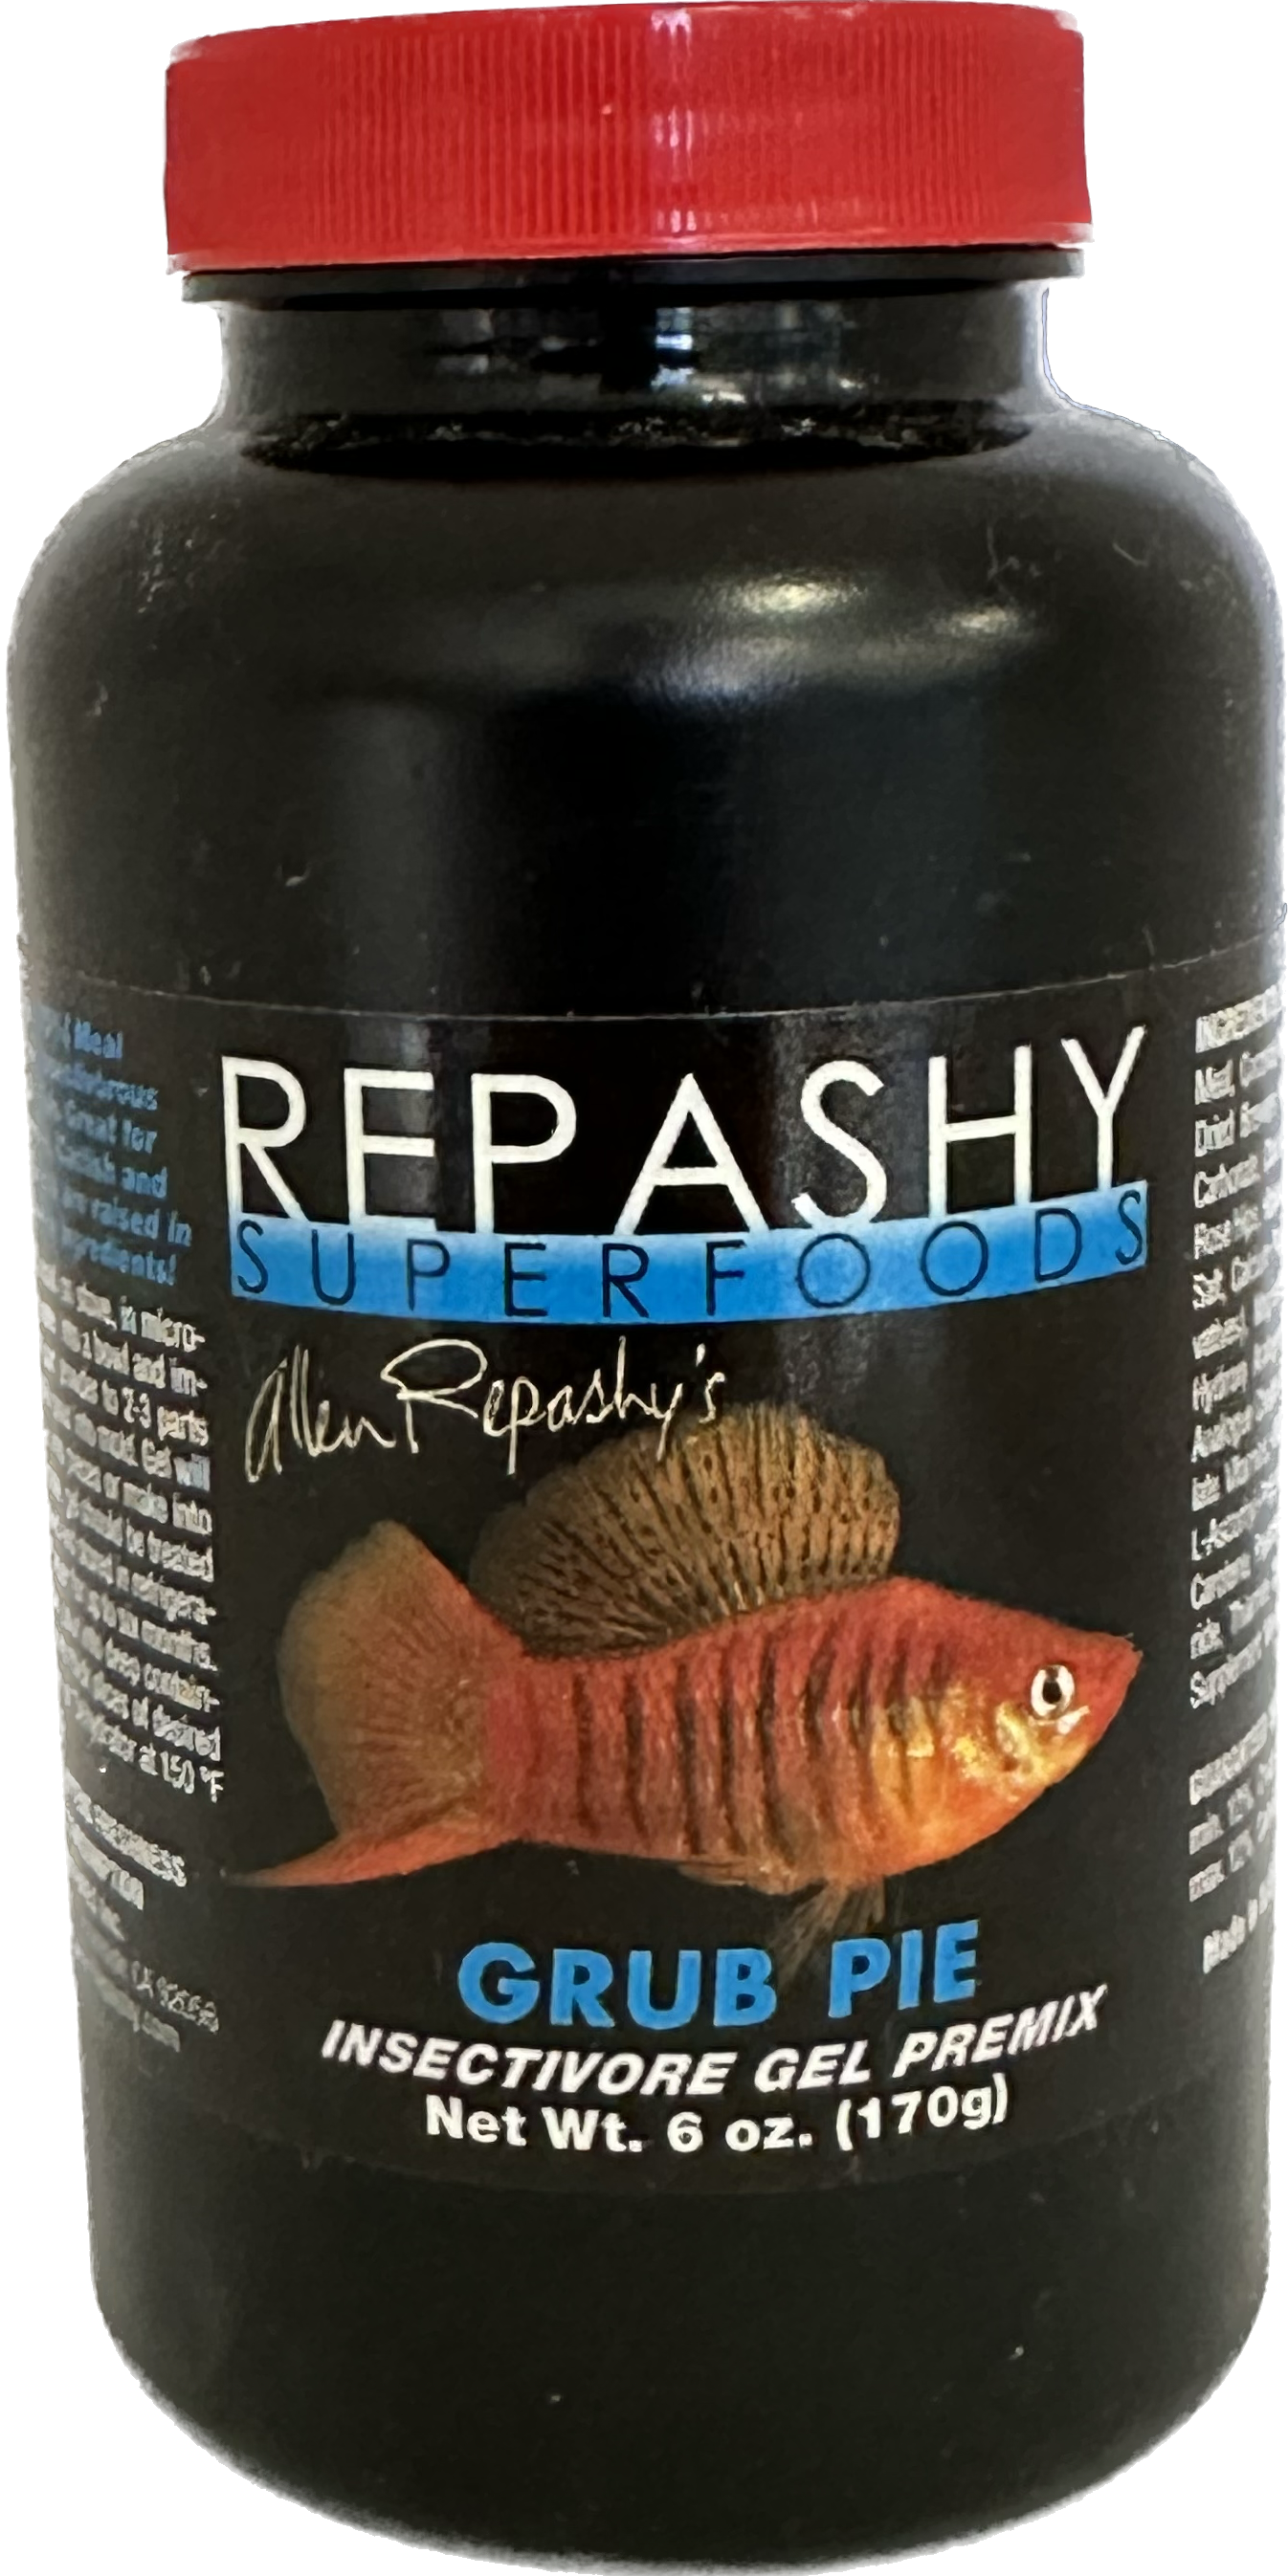 What is Repashy Superfoods?